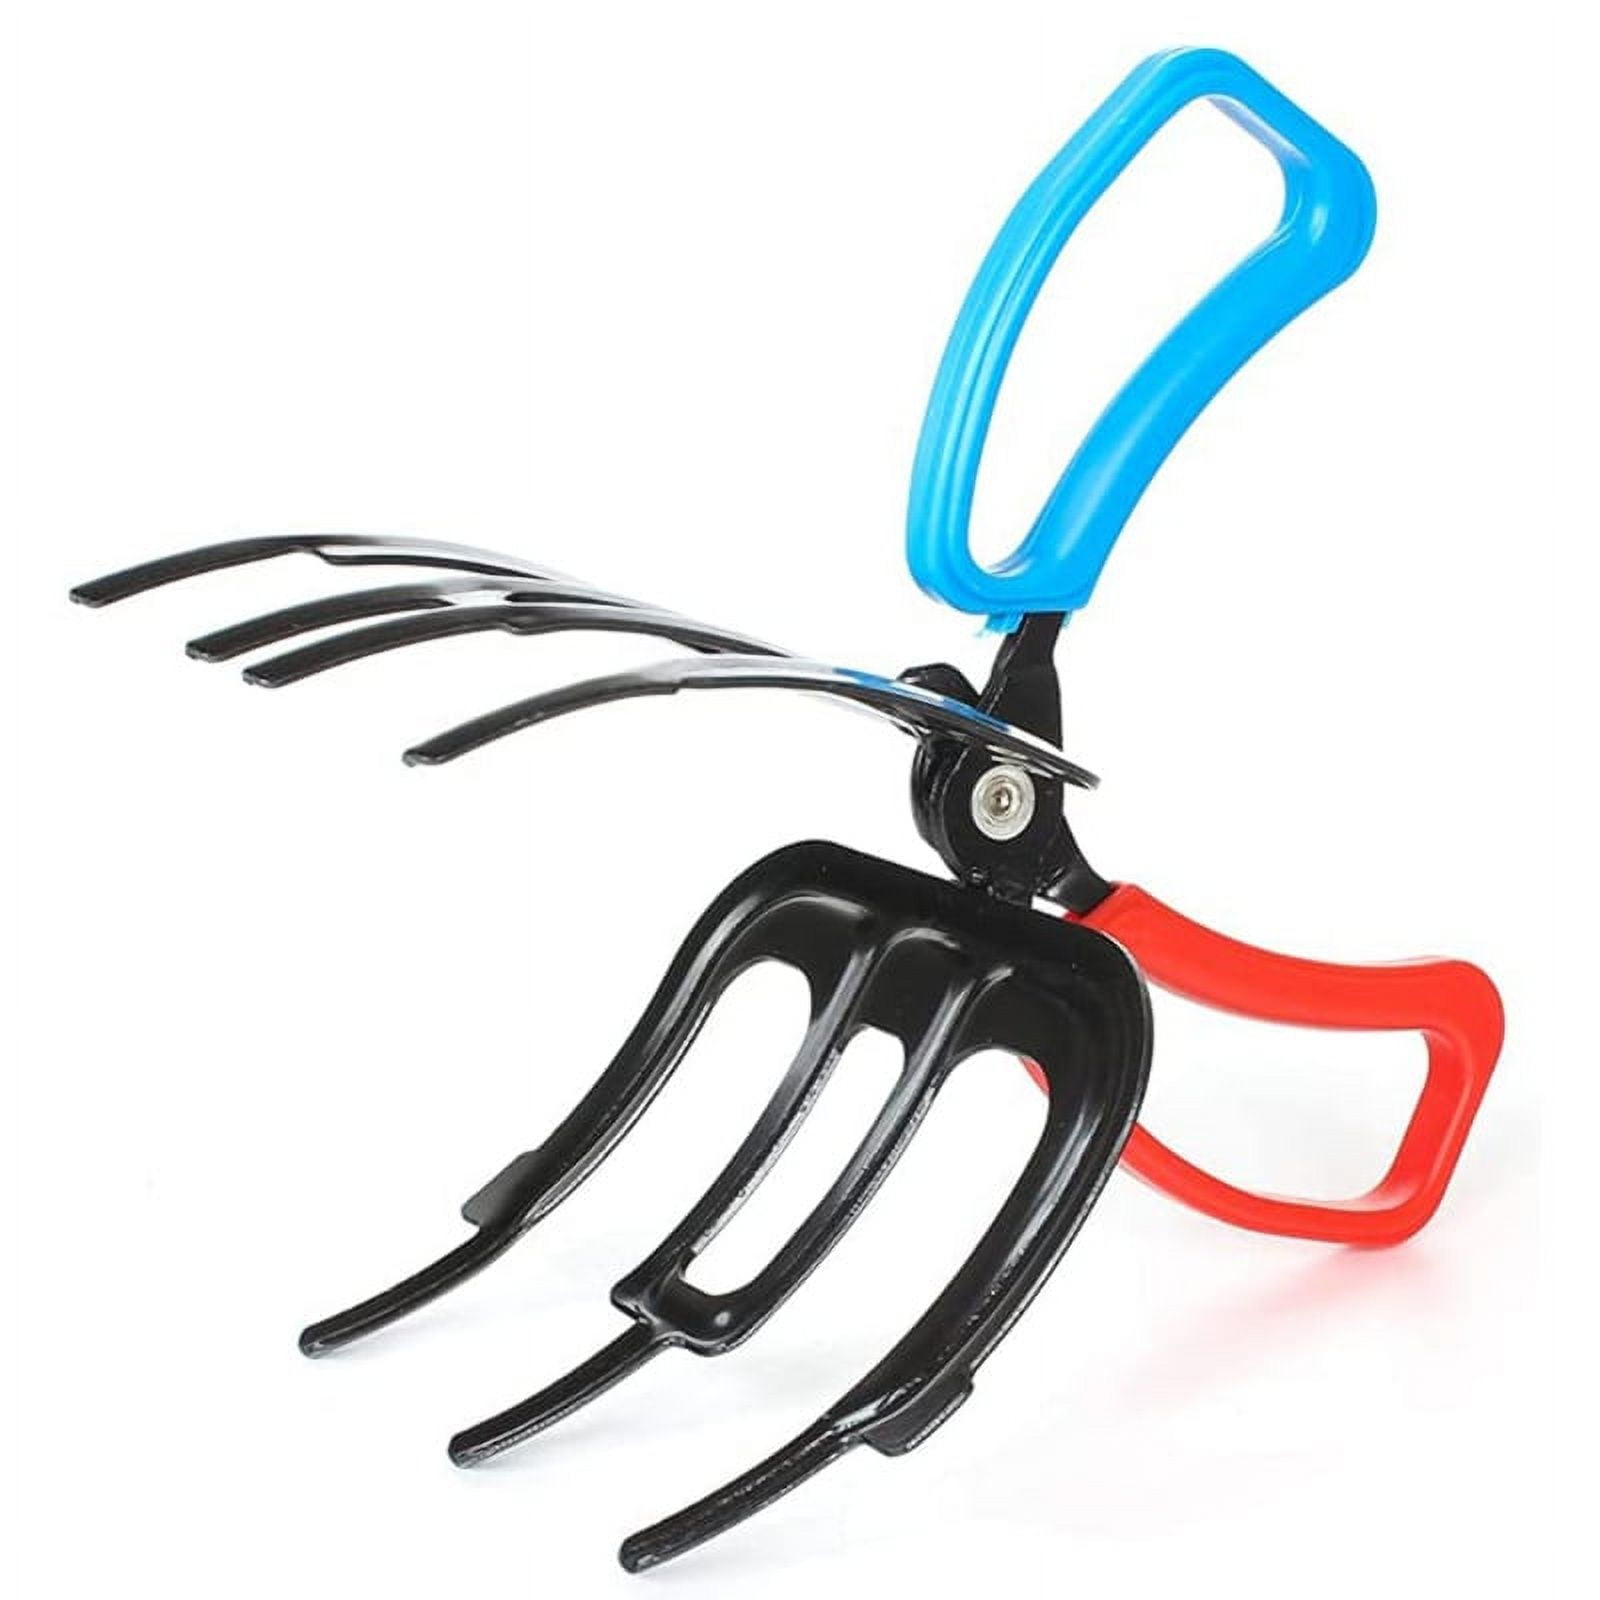 RABBITH Fishing Pliers Gripper Metal Fish Control Clamp Claw Tong Grip  Tackle Tool Control Forceps for Catch Fish Fishing Accessories 